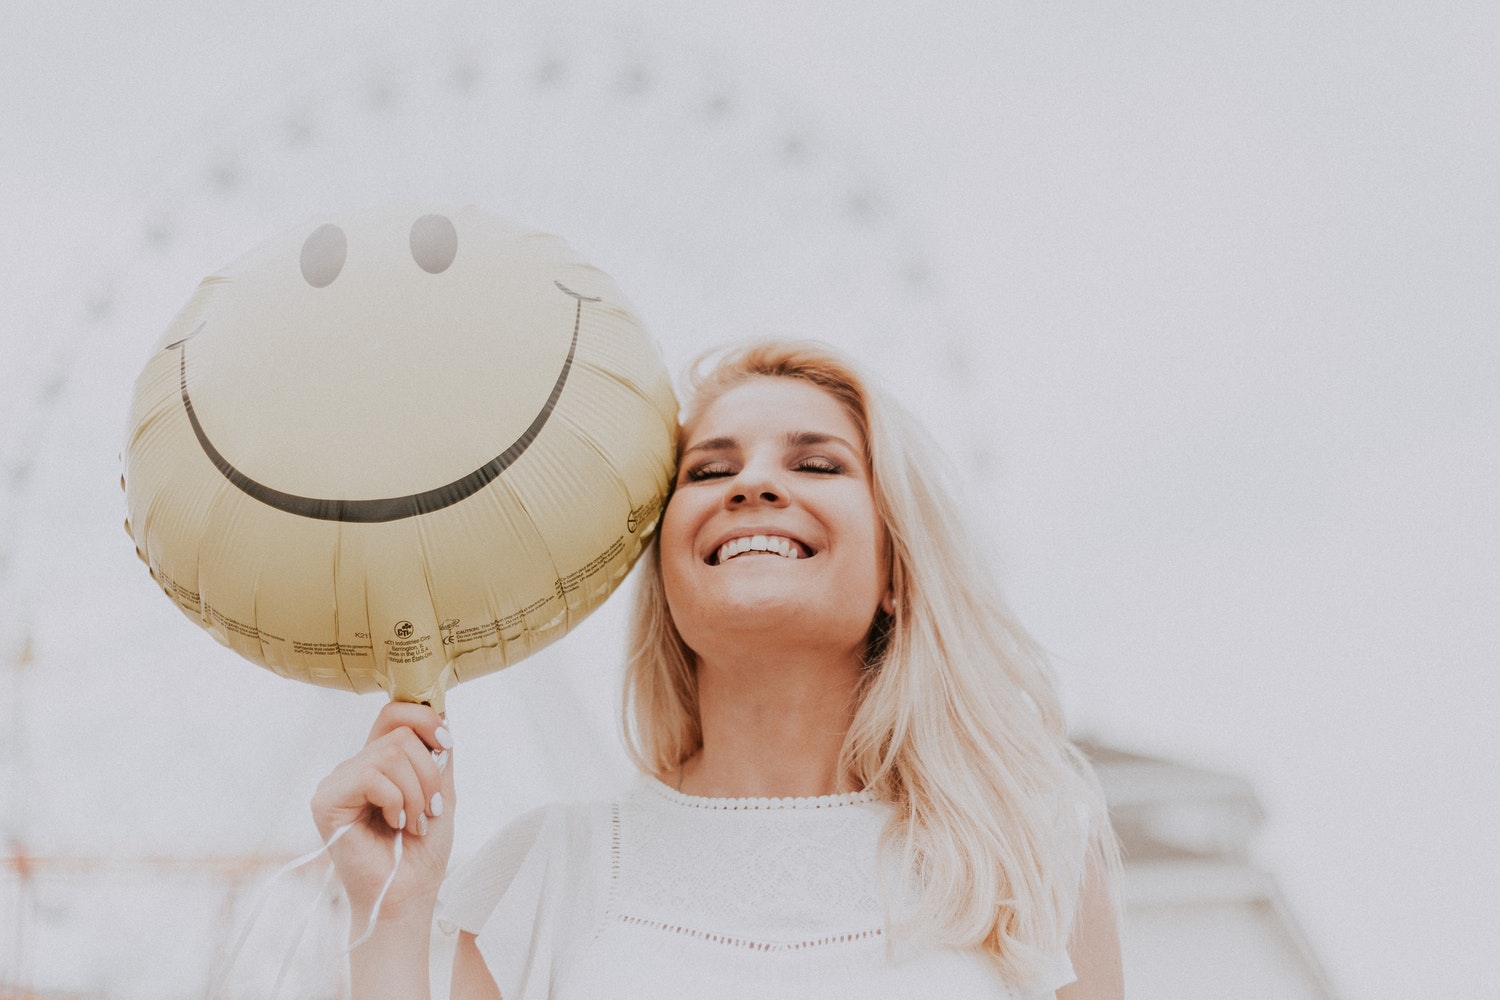 How to Live a Life That’s Characterized by Positivity